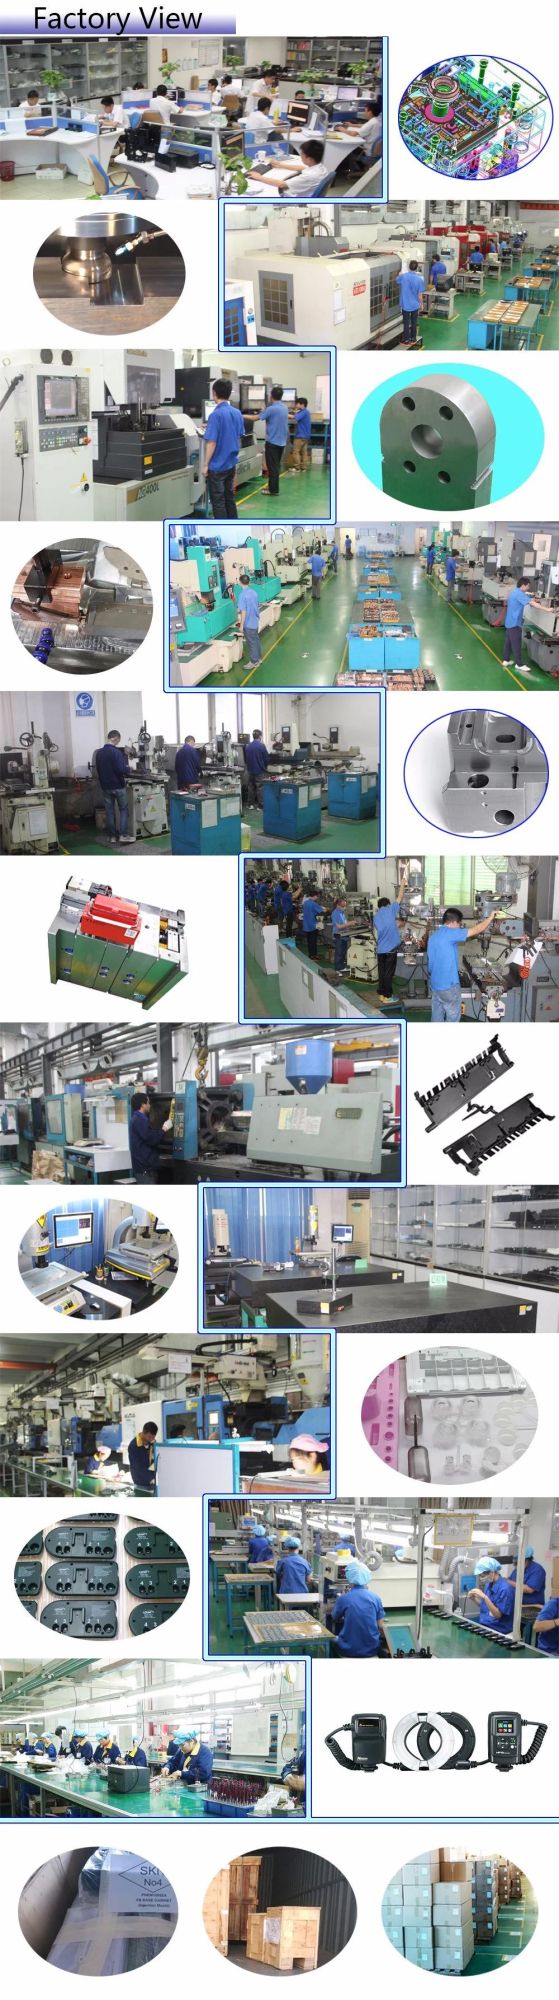 Auto, Motorcycle Plastic Mold, Plastic Parts Mold/Moulding/Tooling/Plastic Injection Molding